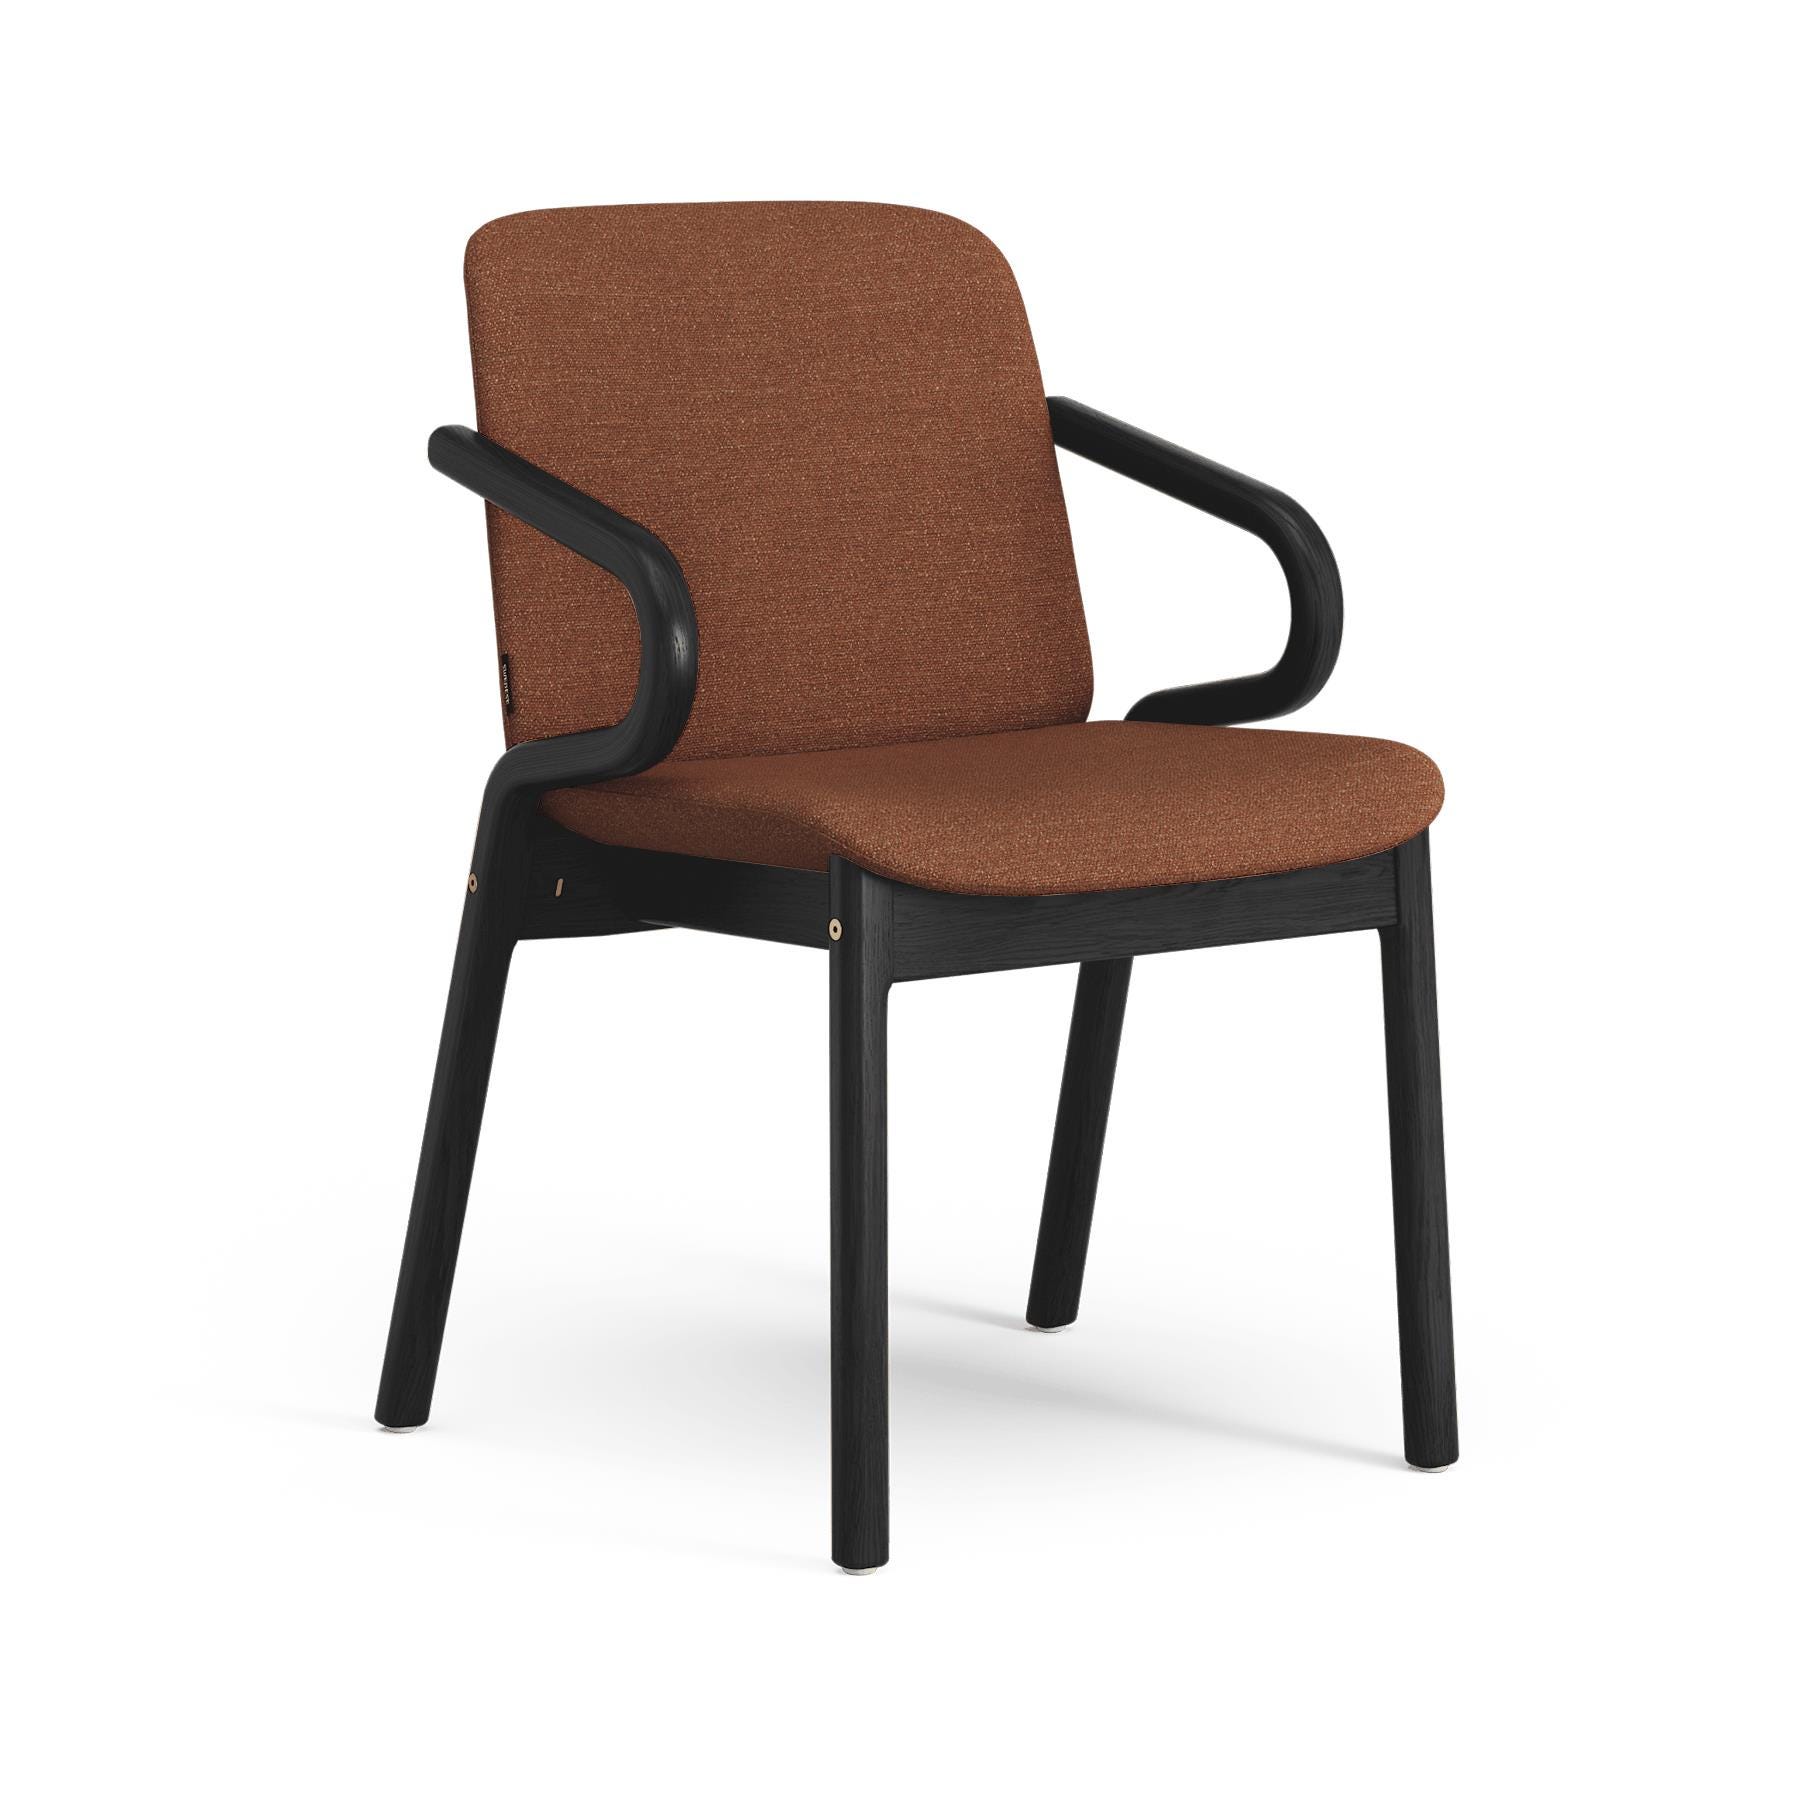 Swedese Amstelle Armchair Black Ash Ecriture 0570 Red Designer Furniture From Holloways Of Ludlow